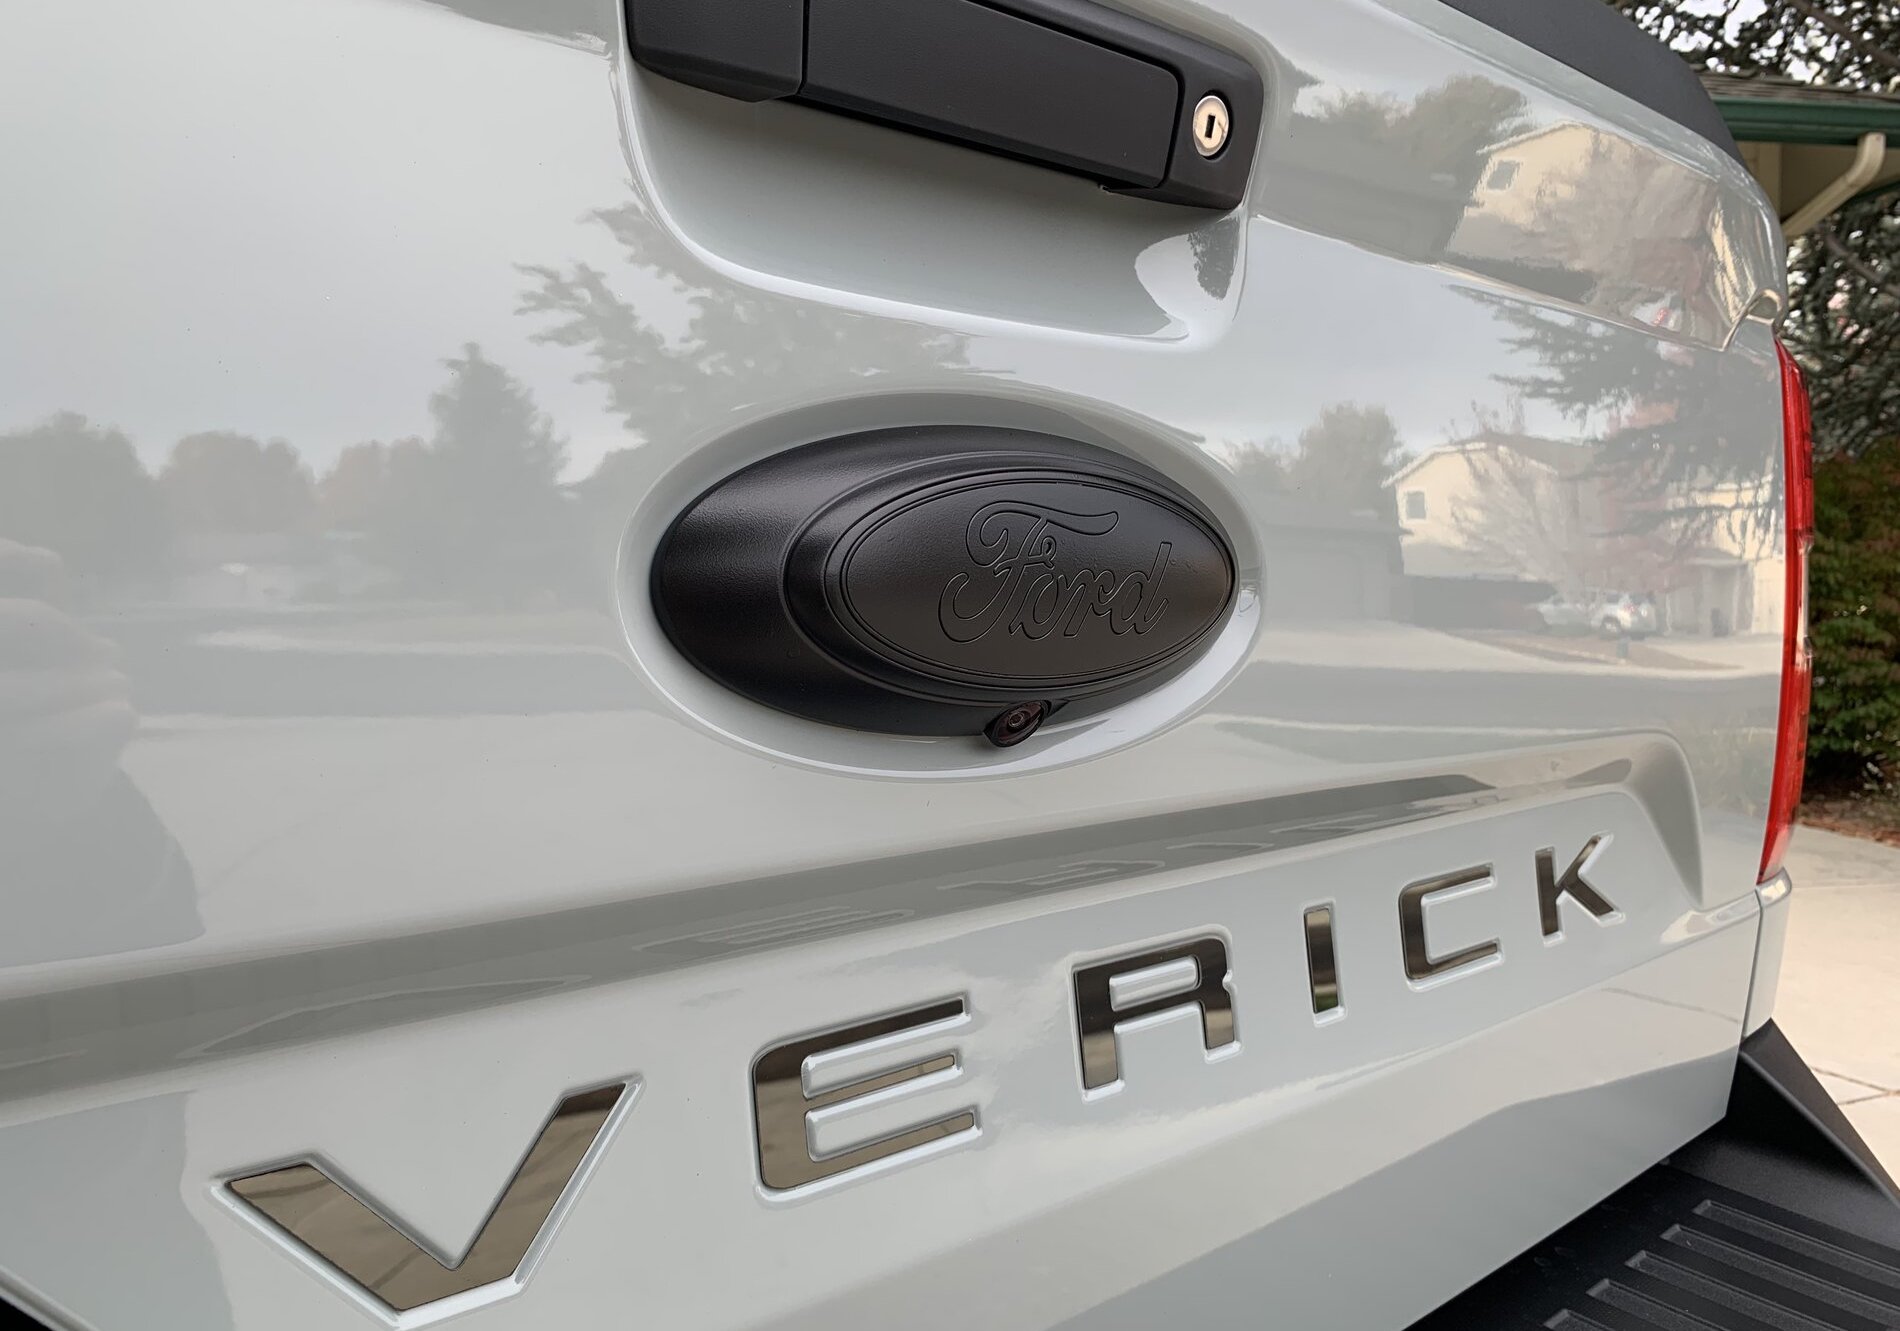 HyperDip = Bye chrome trim (blacked out emblems with plastidip like spray)   MaverickTruckClub - 2022+ Ford Maverick Pickup Forum, News, Owners,  Discussions